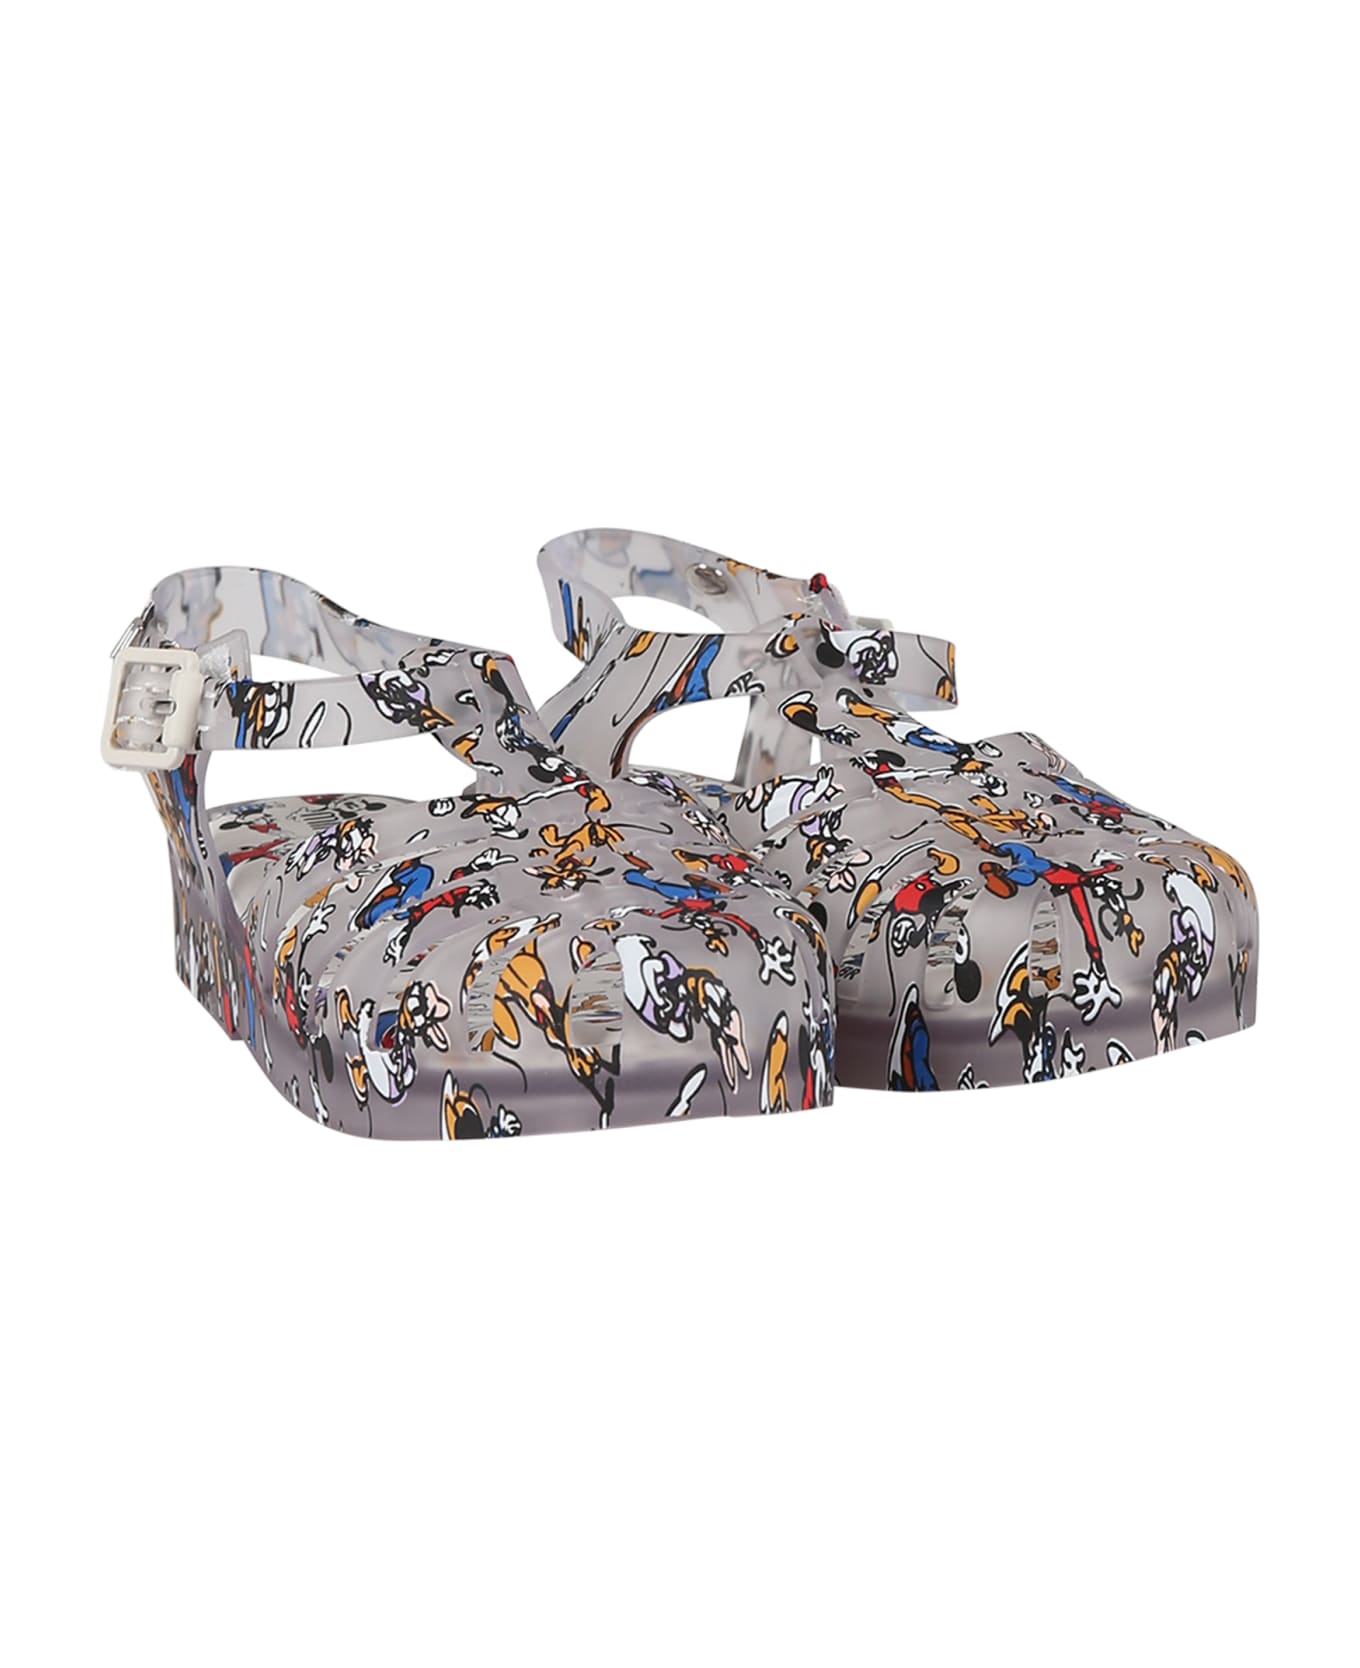 Melissa Multicolor Sandals For Boy With Disney Characters - Multicolor